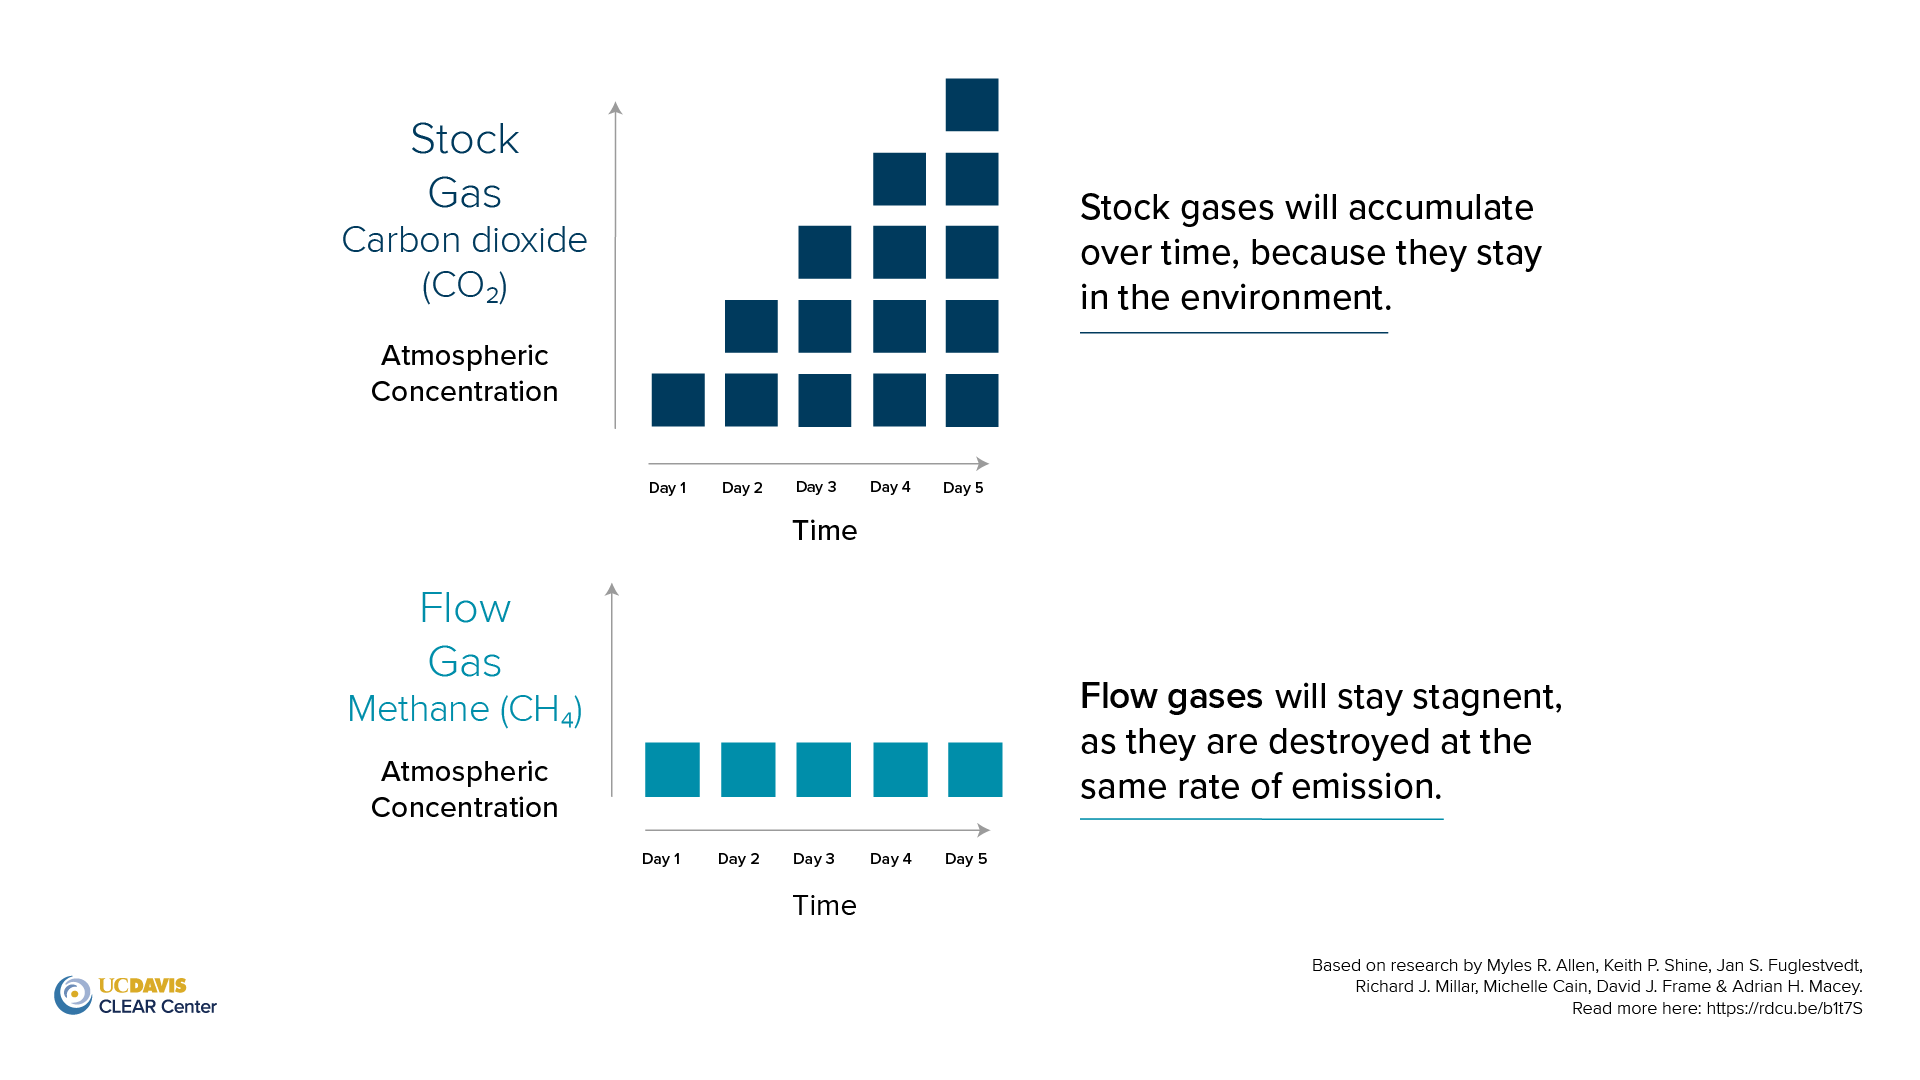 Photo of blocks stockpiling to represent stock gas and photo of blocks in a constant to represent flow gas